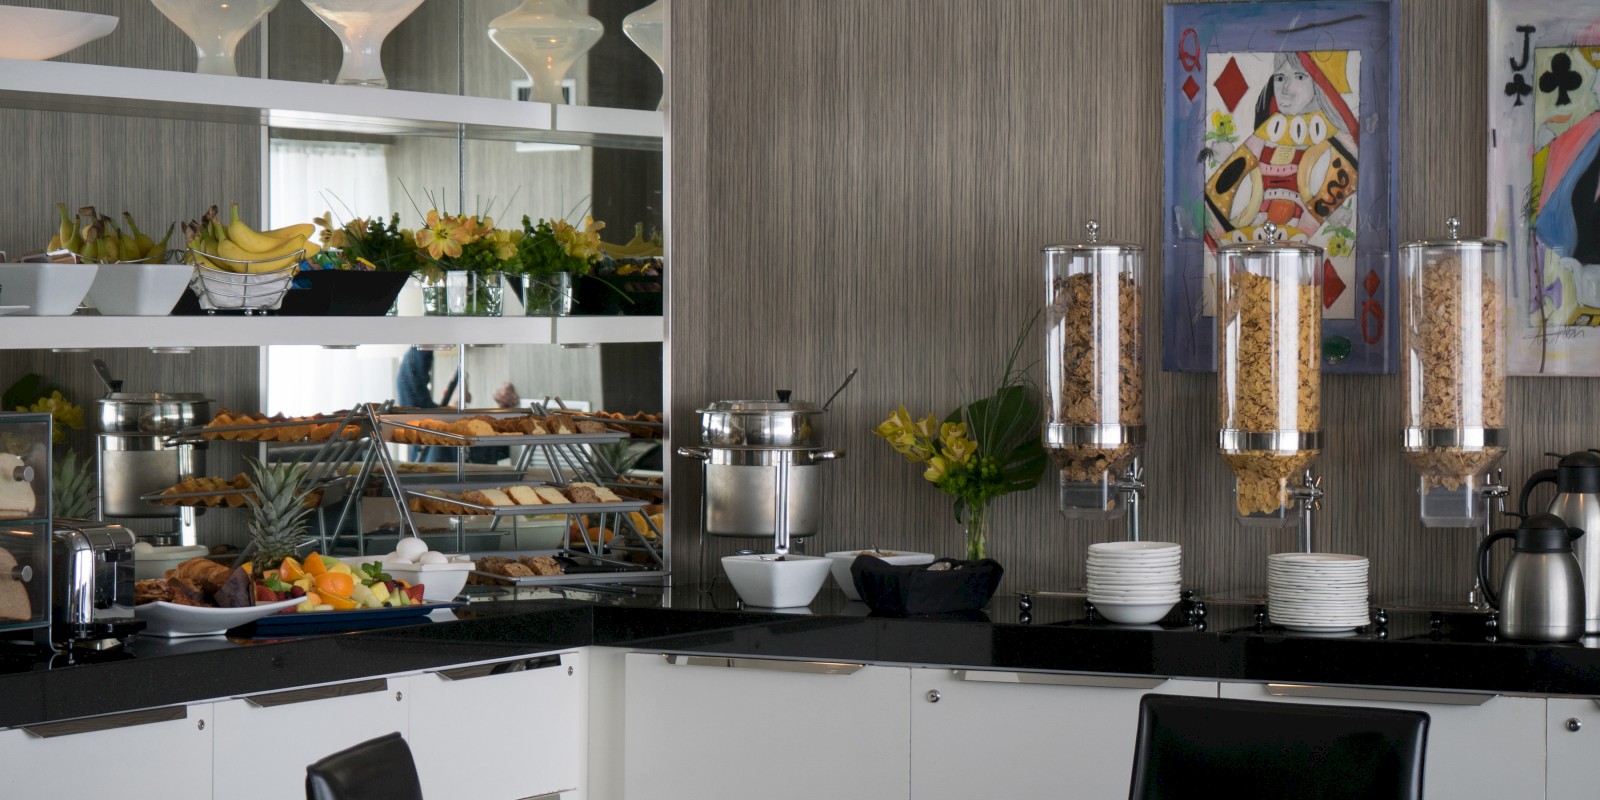 A modern breakfast buffet setup with cereal dispensers, a coffee maker, various fruits, pastries, and decorative items, in a clean dining room.